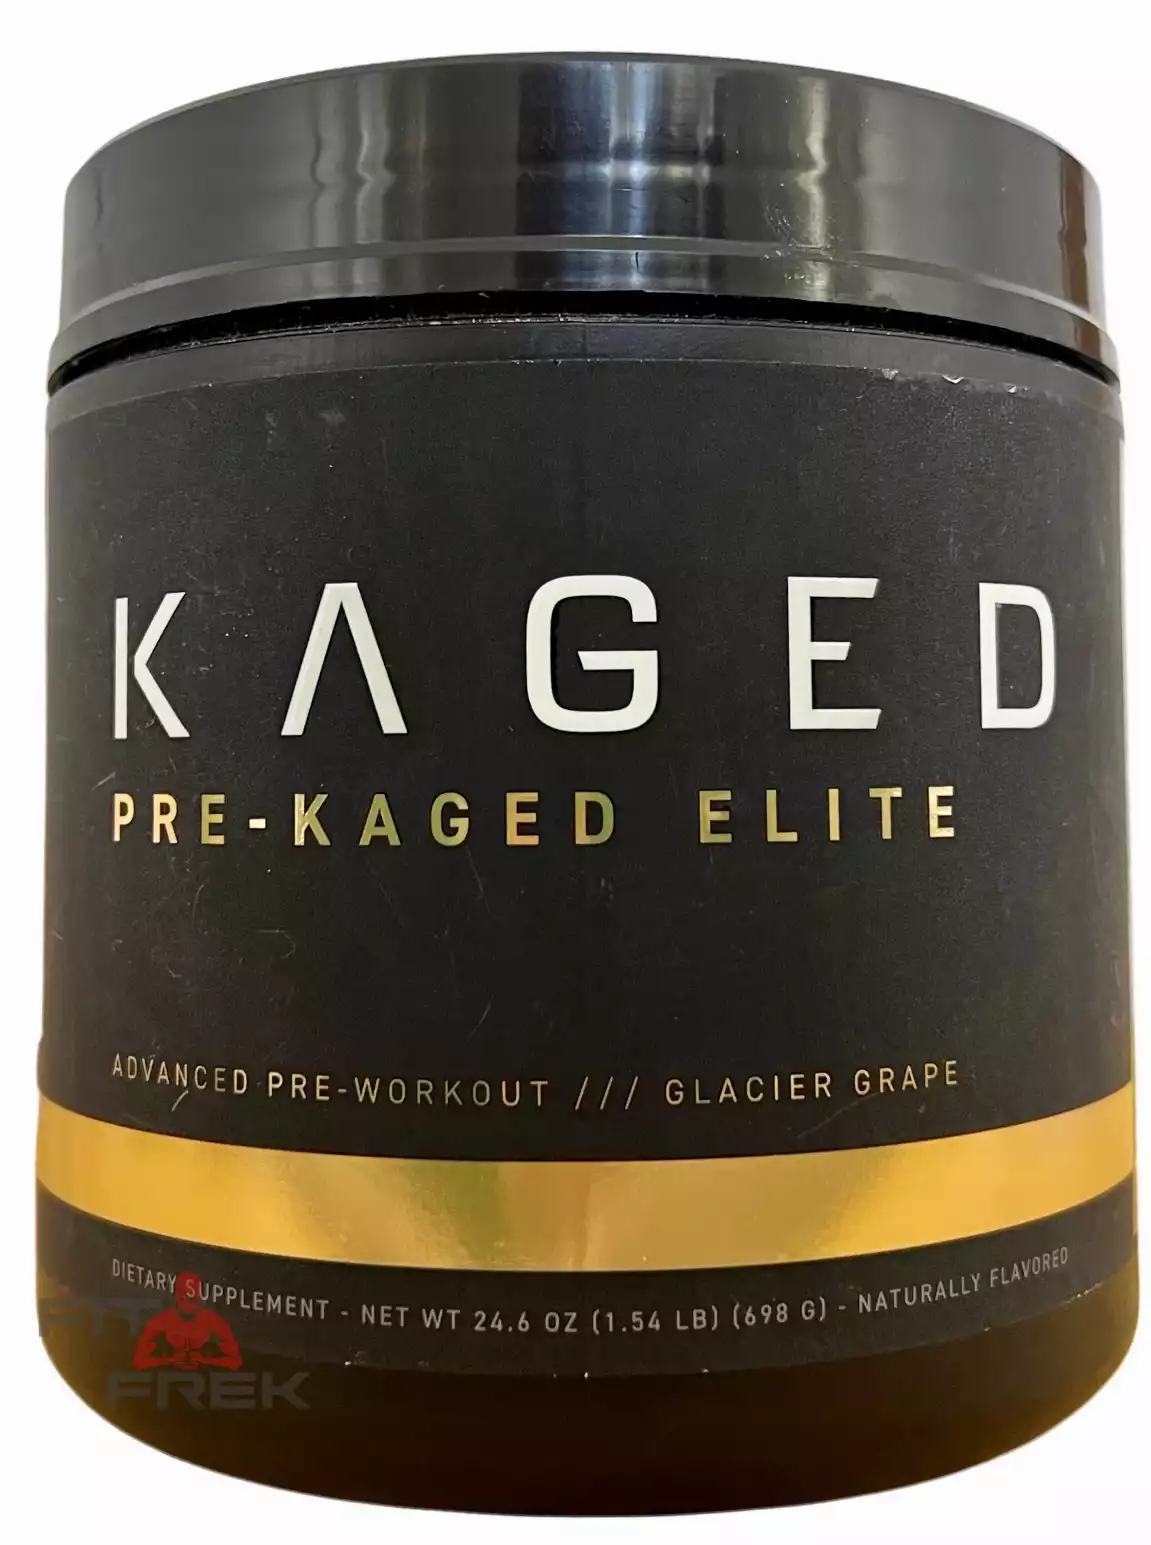 Pre-Kaged Elite by Kaged